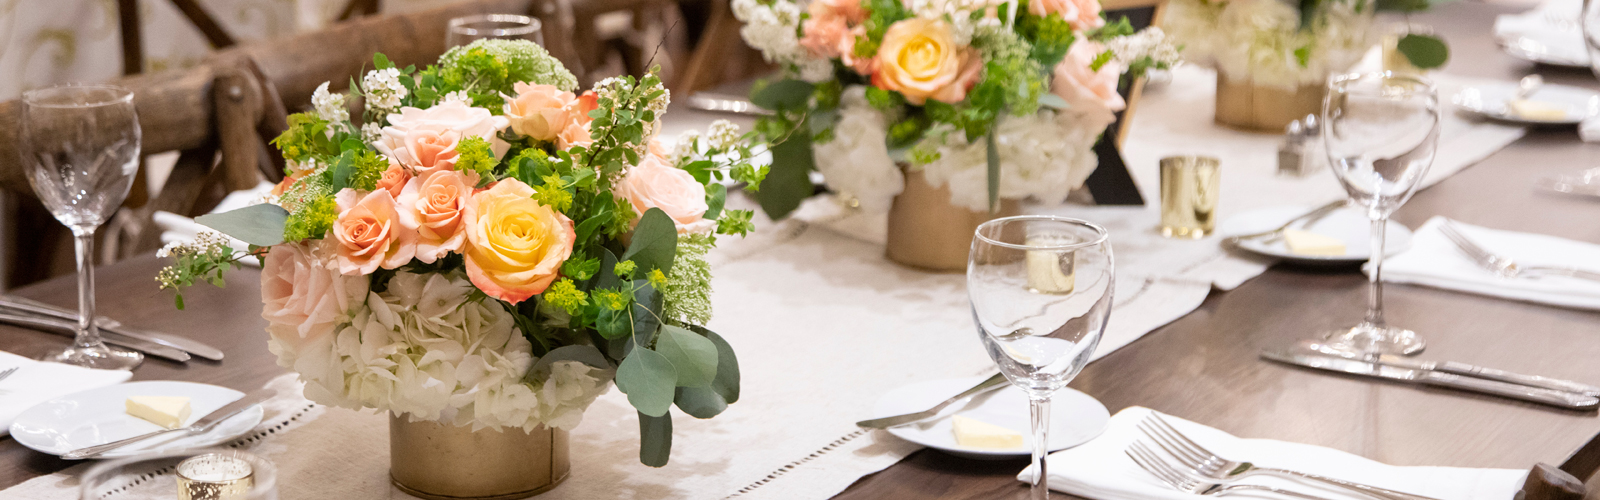 A photo of the table setup at Hats and Horses, featuring vases of flowers, plates, napkins, and glasses